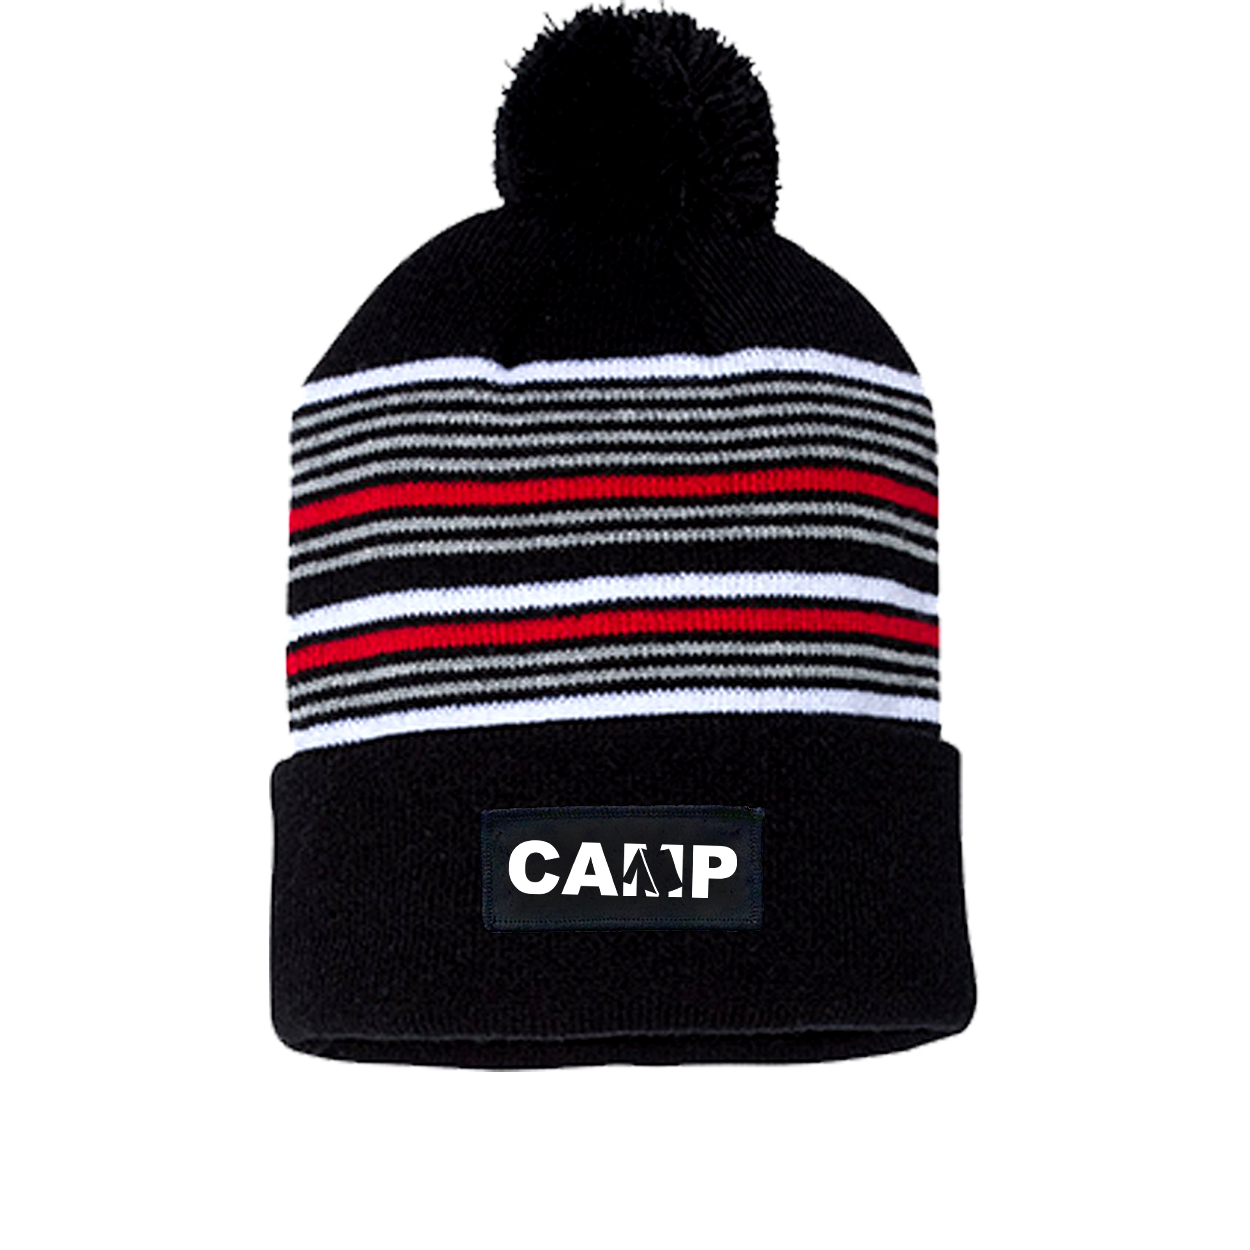 Camp Tent Logo Night Out Woven Patch Roll Up Pom Knit Beanie Black/ White/ Grey/ Red Beanie (White Logo)